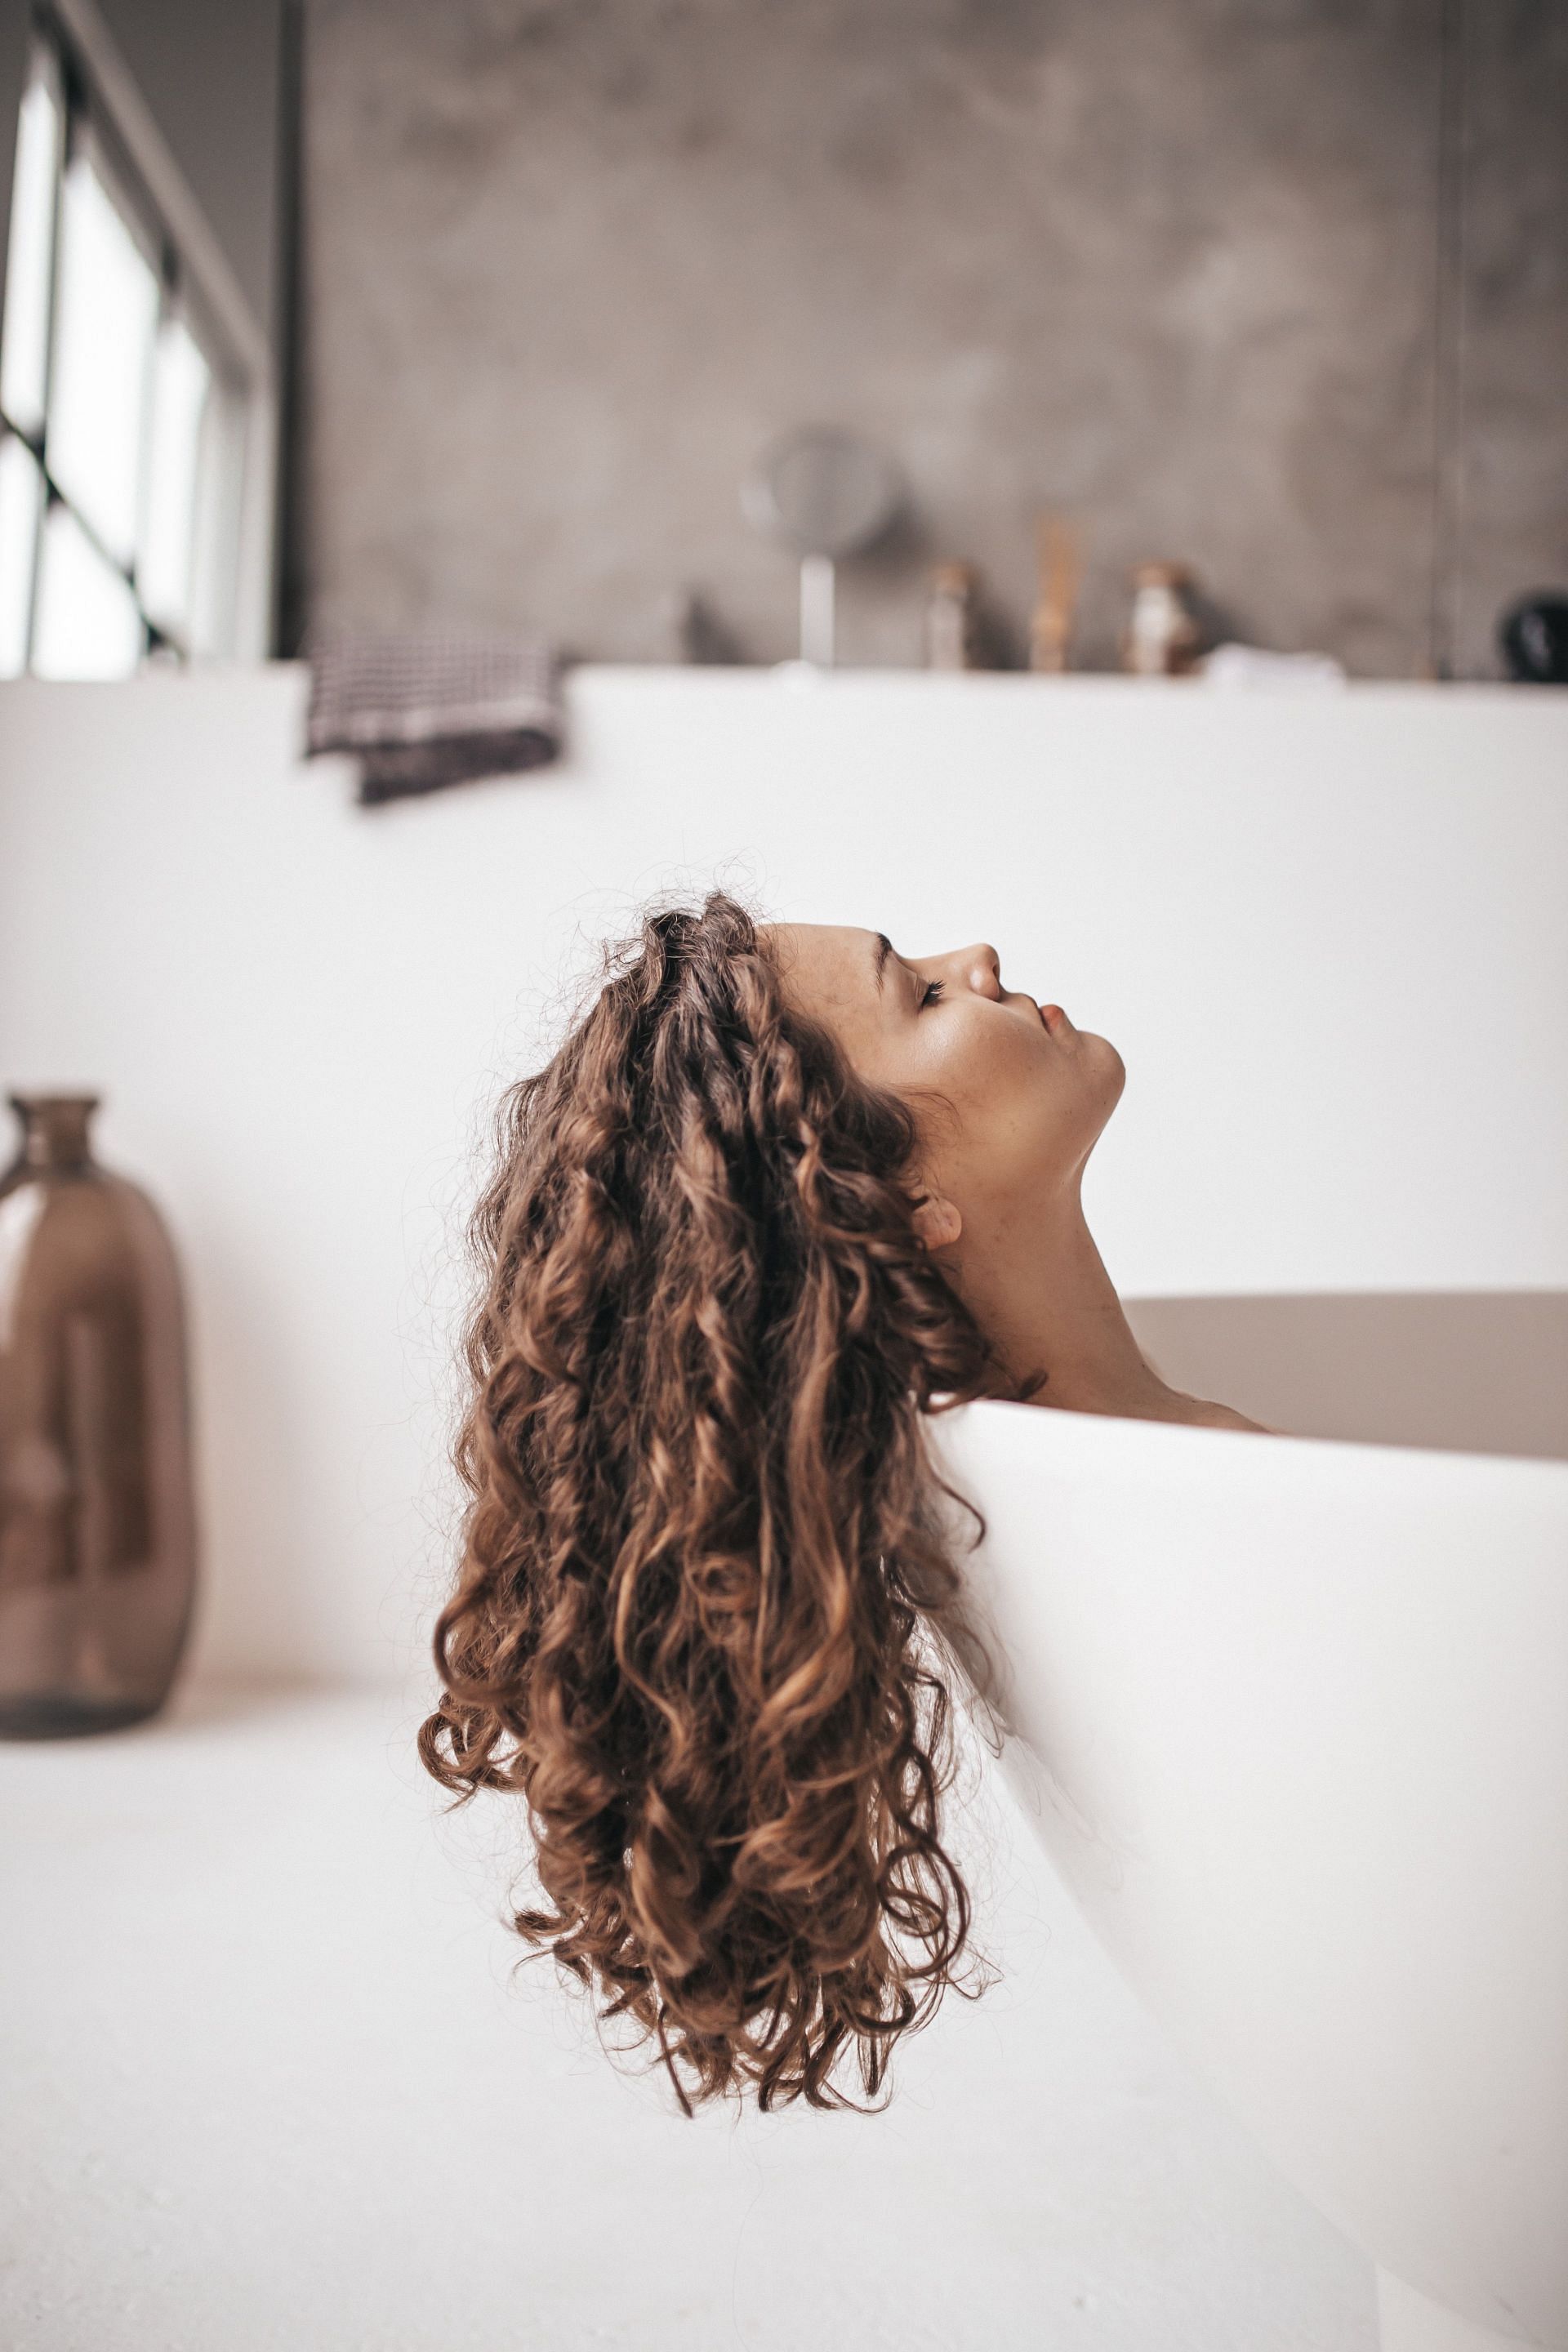 How to properly cleanse your hair after a workout? (Image via Unsplash)